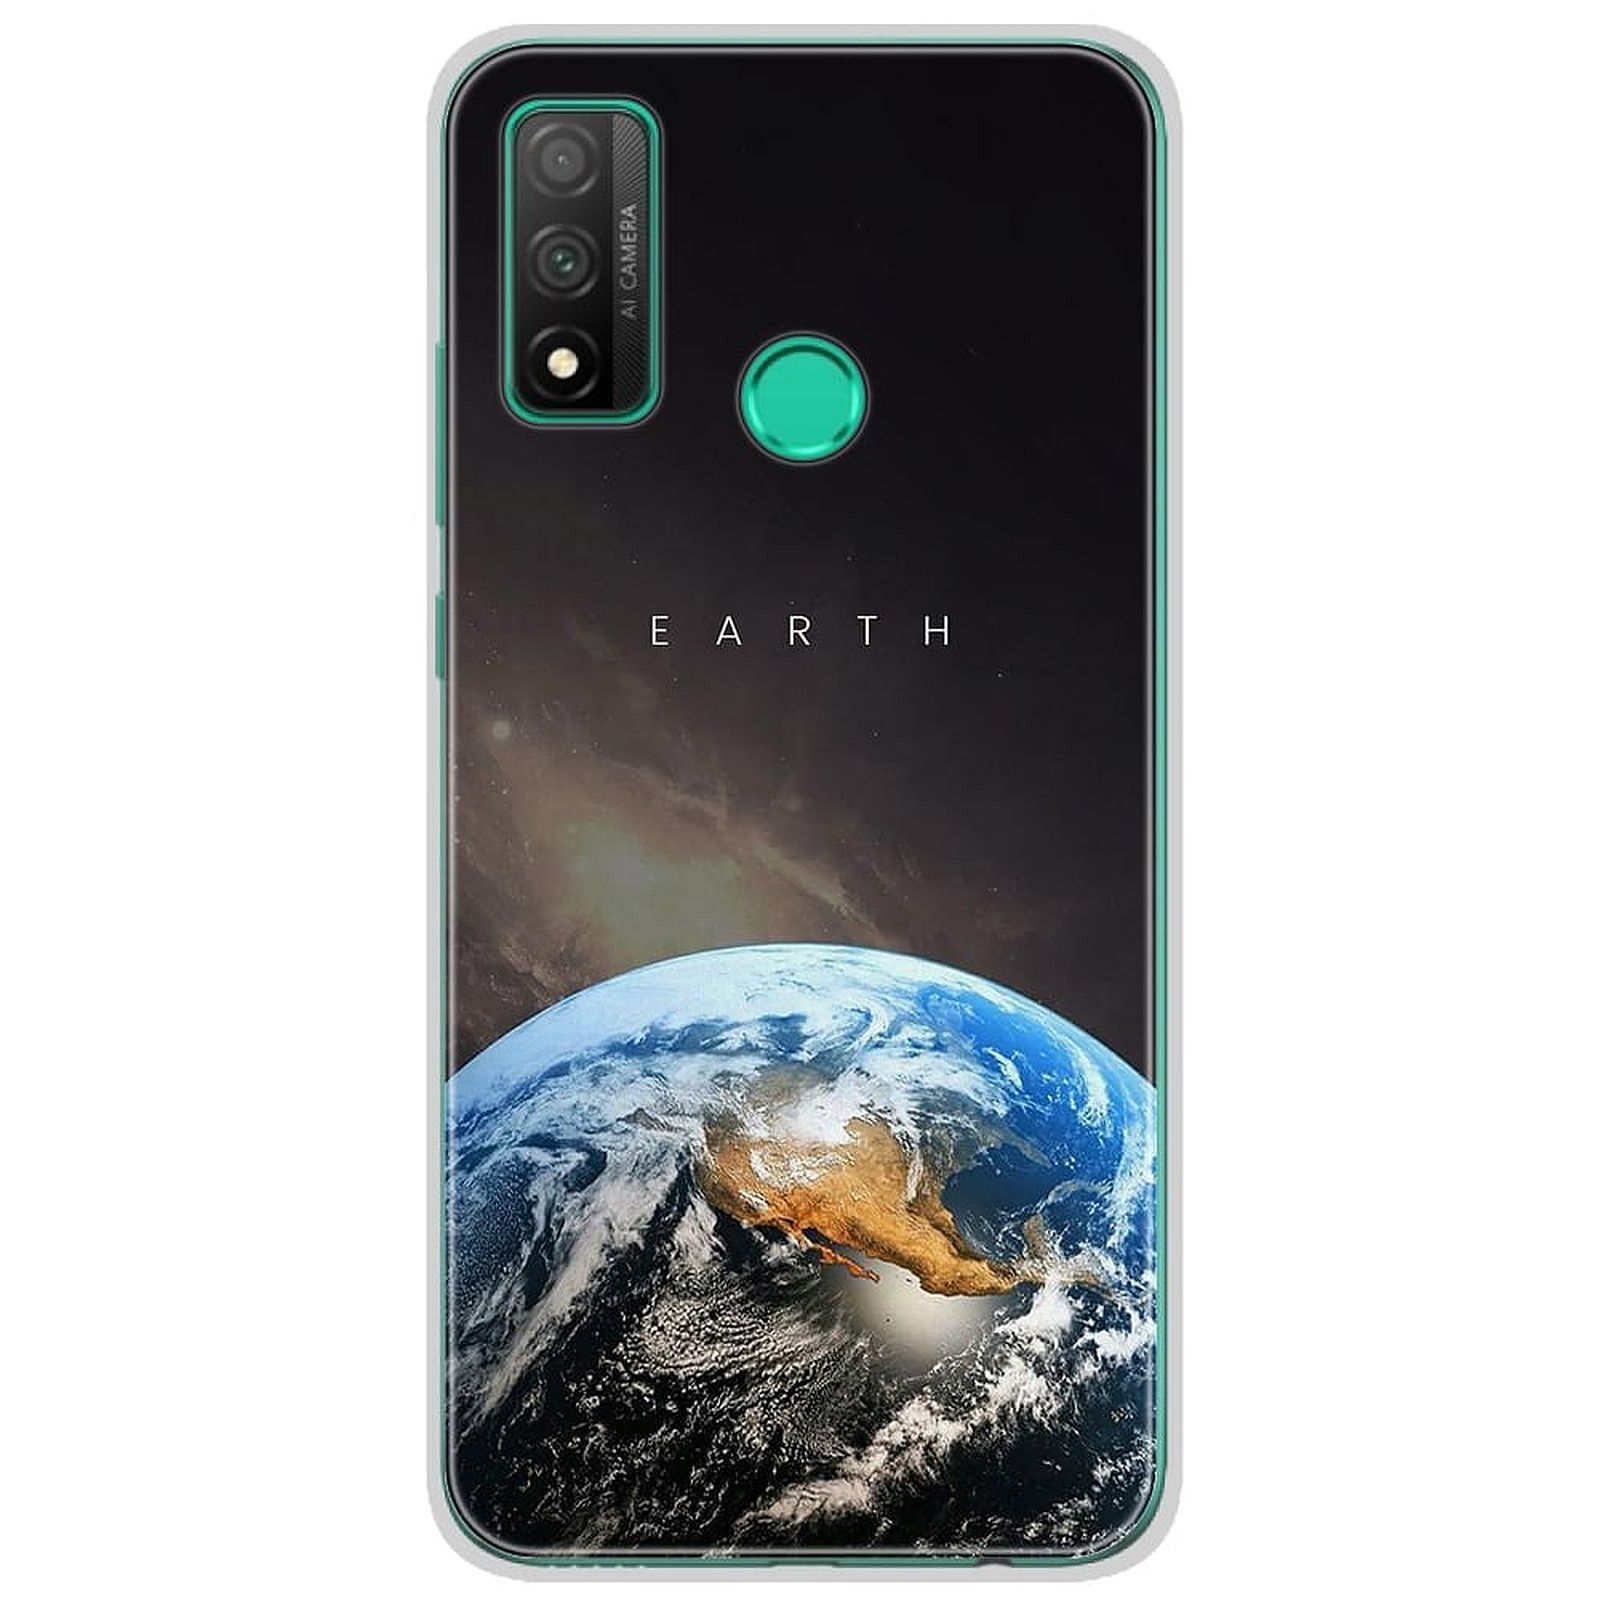 1001 Coques Coque silicone gel Huawei P Smart 2020 motif Earth - Coque telephone 1001Coques